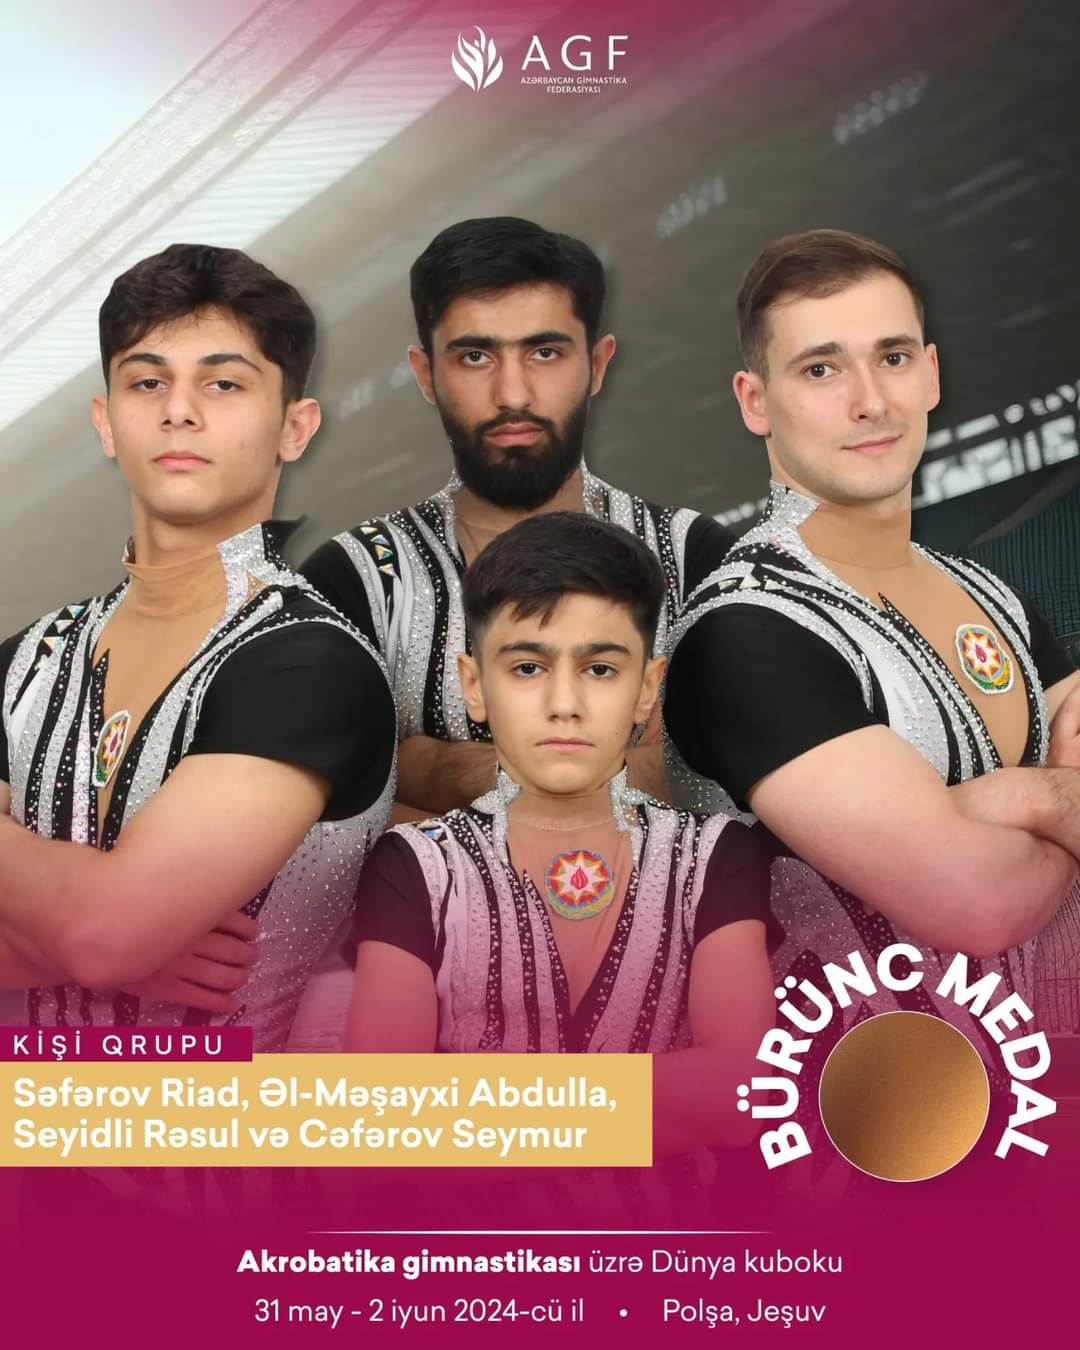 Azerbaijani gymnasts win medals at World Cup and international tournament in Poland (PHOTO)